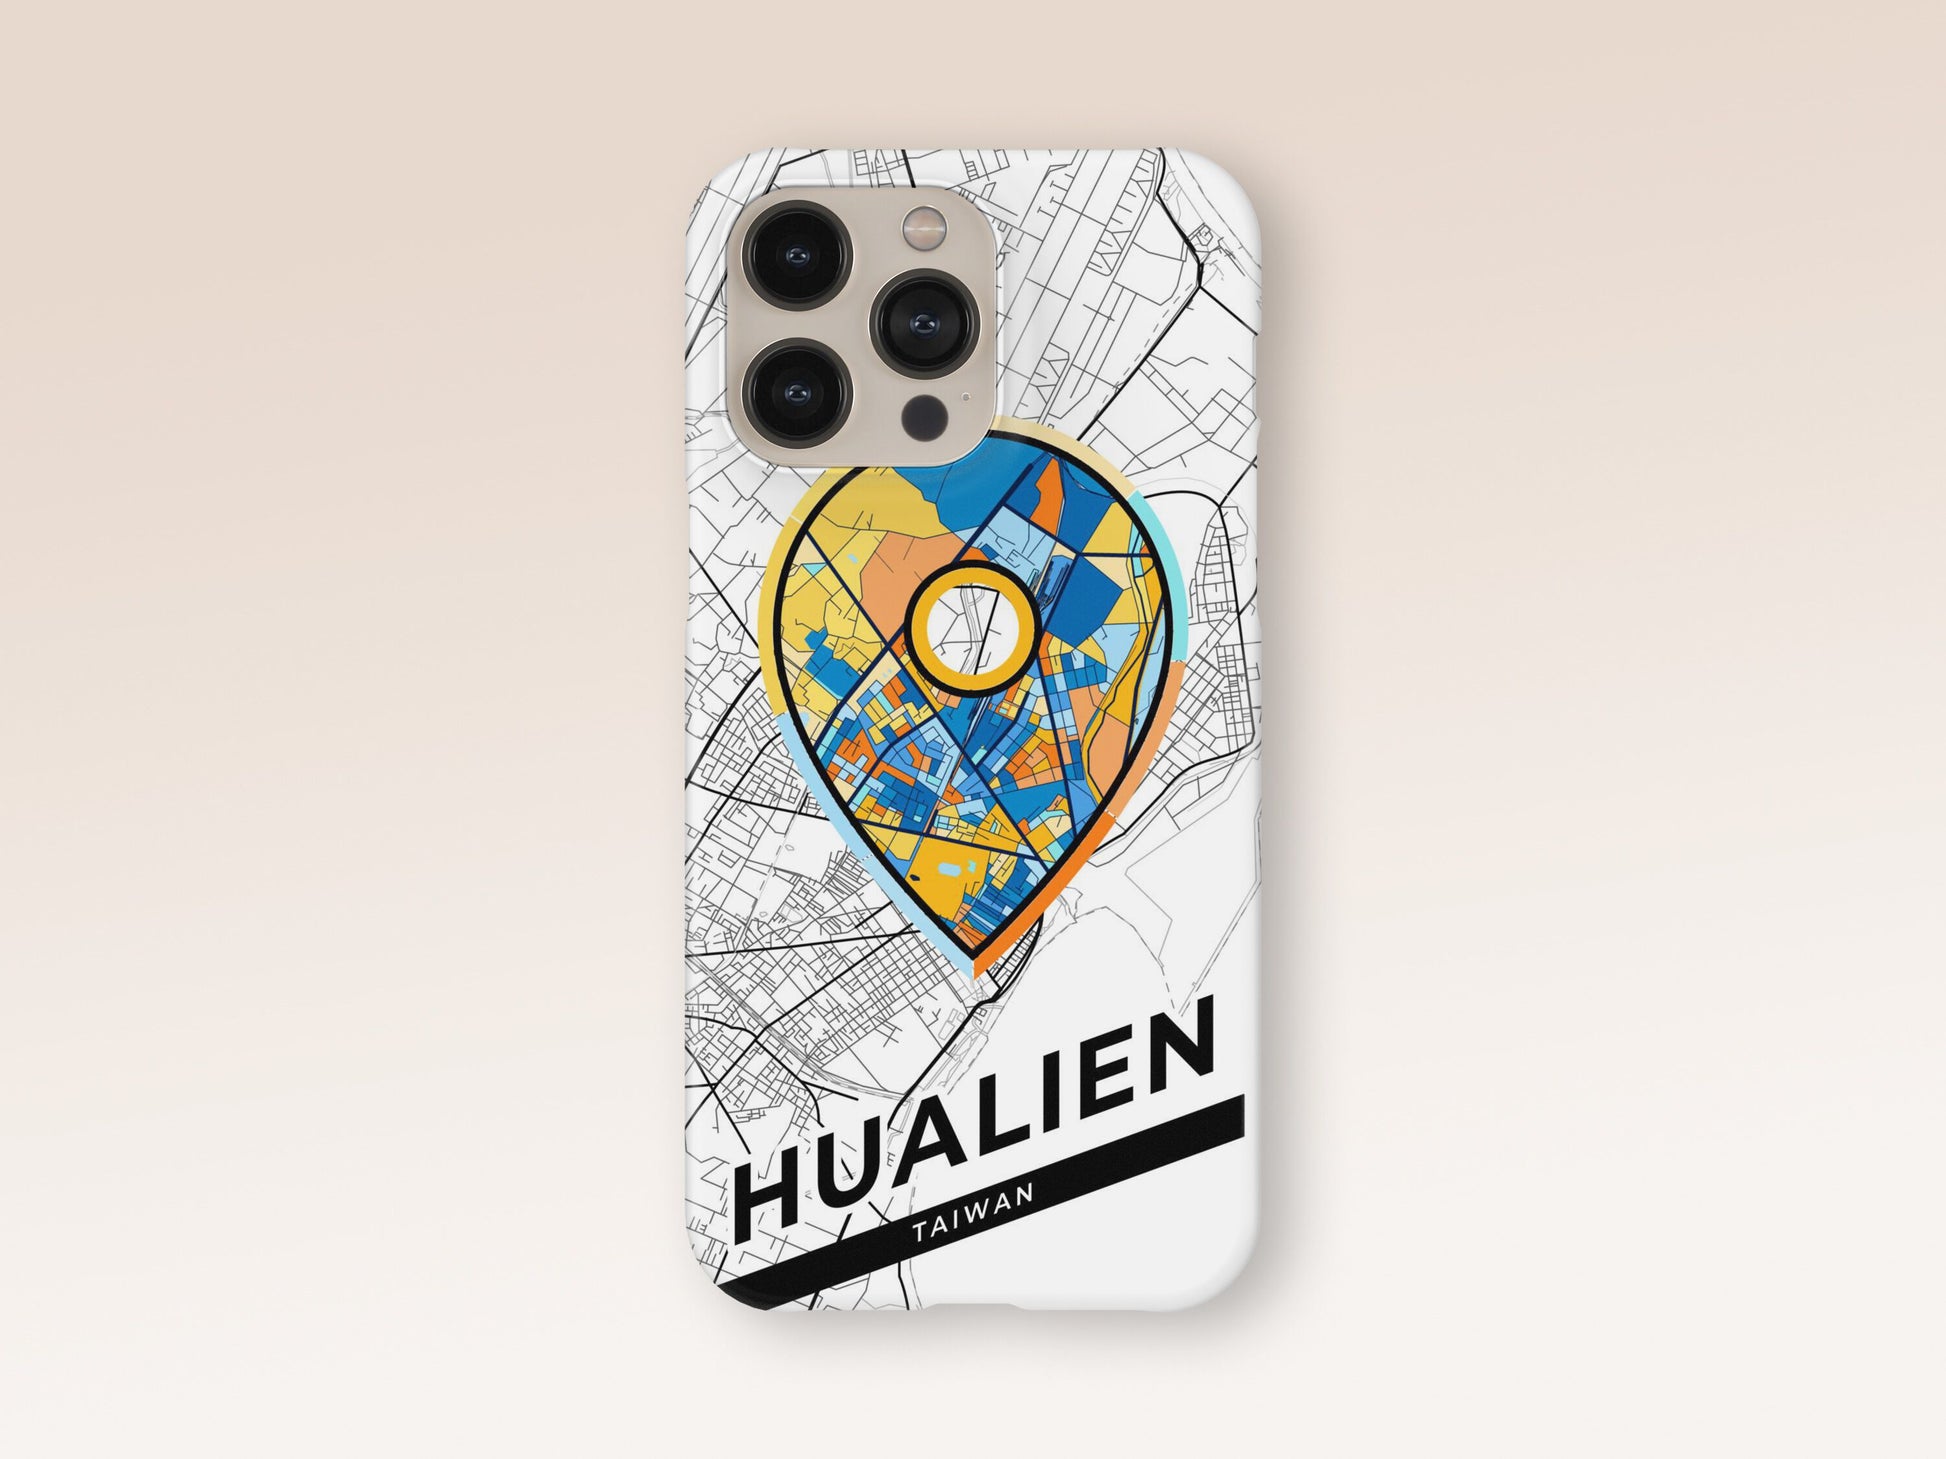 Hualien Taiwan slim phone case with colorful icon. Birthday, wedding or housewarming gift. Couple match cases. 1